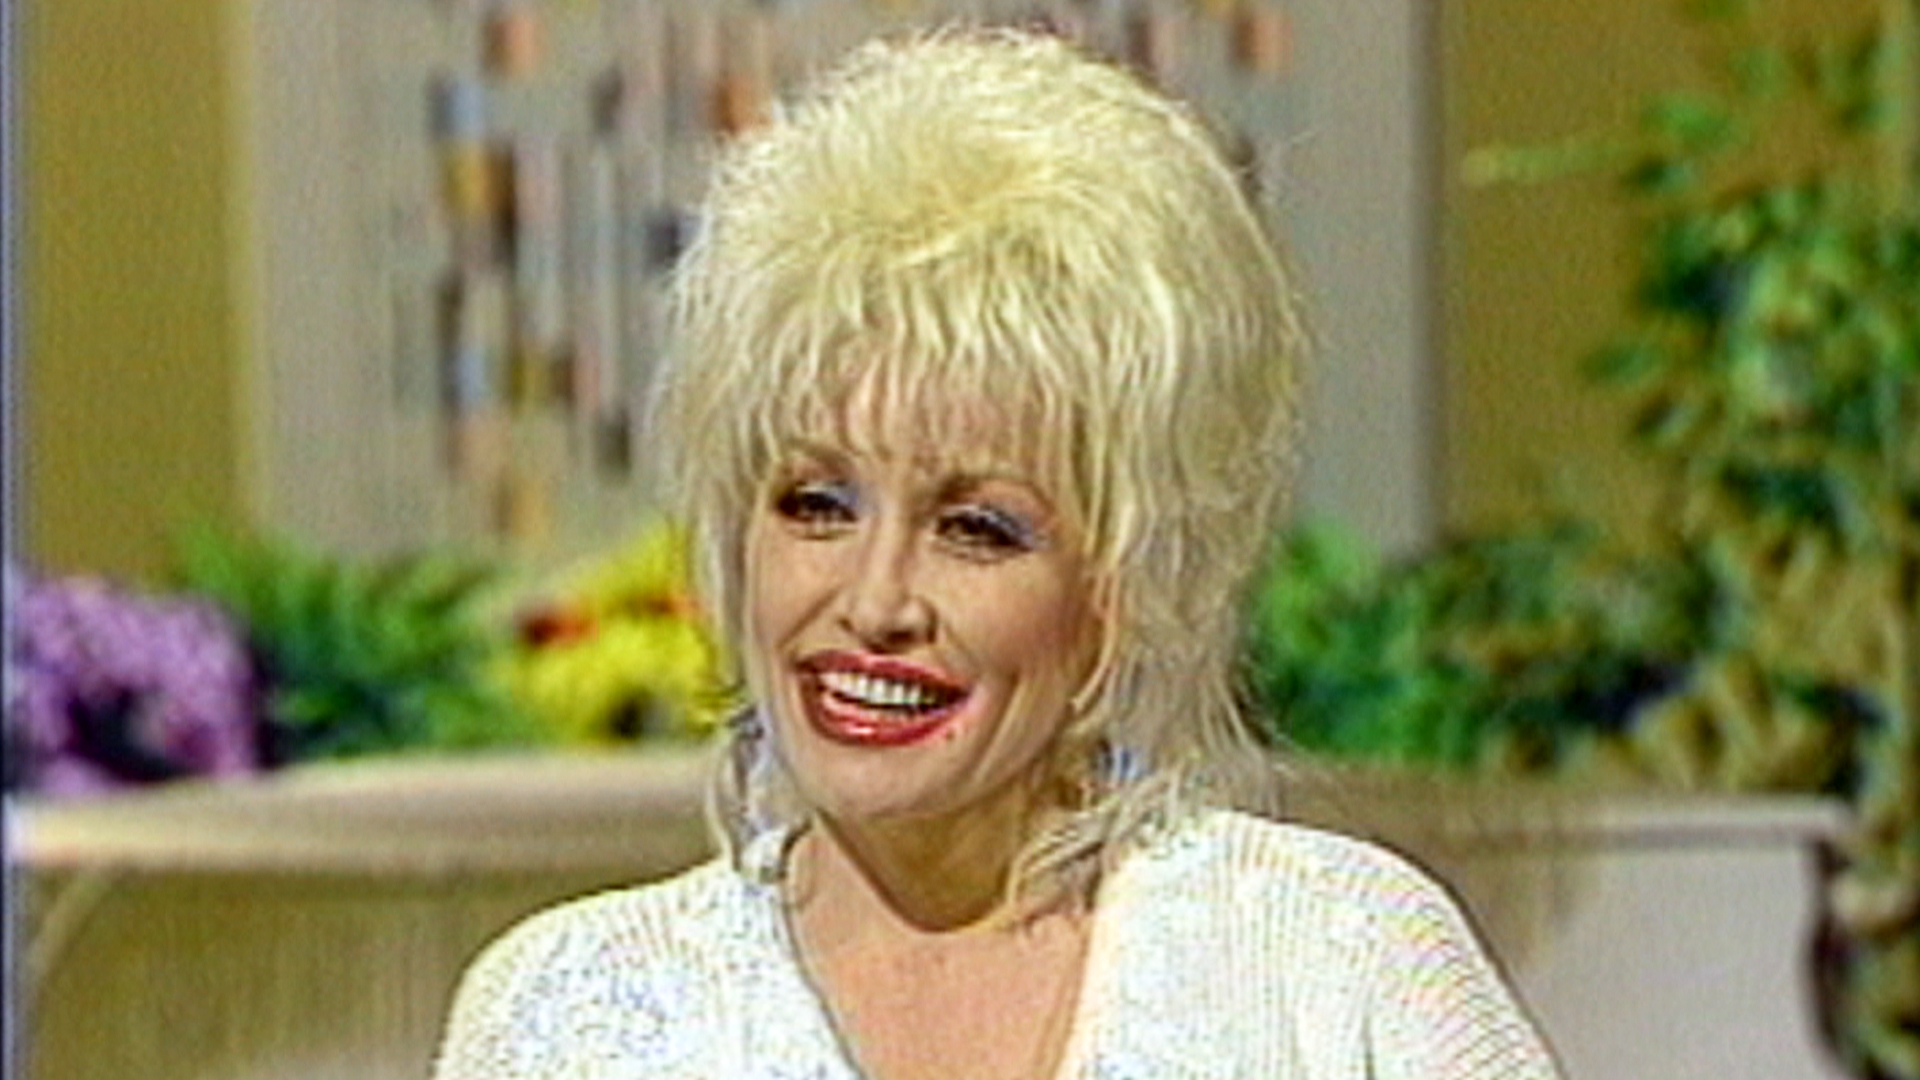 Flashback: See Dolly Parton's awesome attitude toward aging - TODAY.com